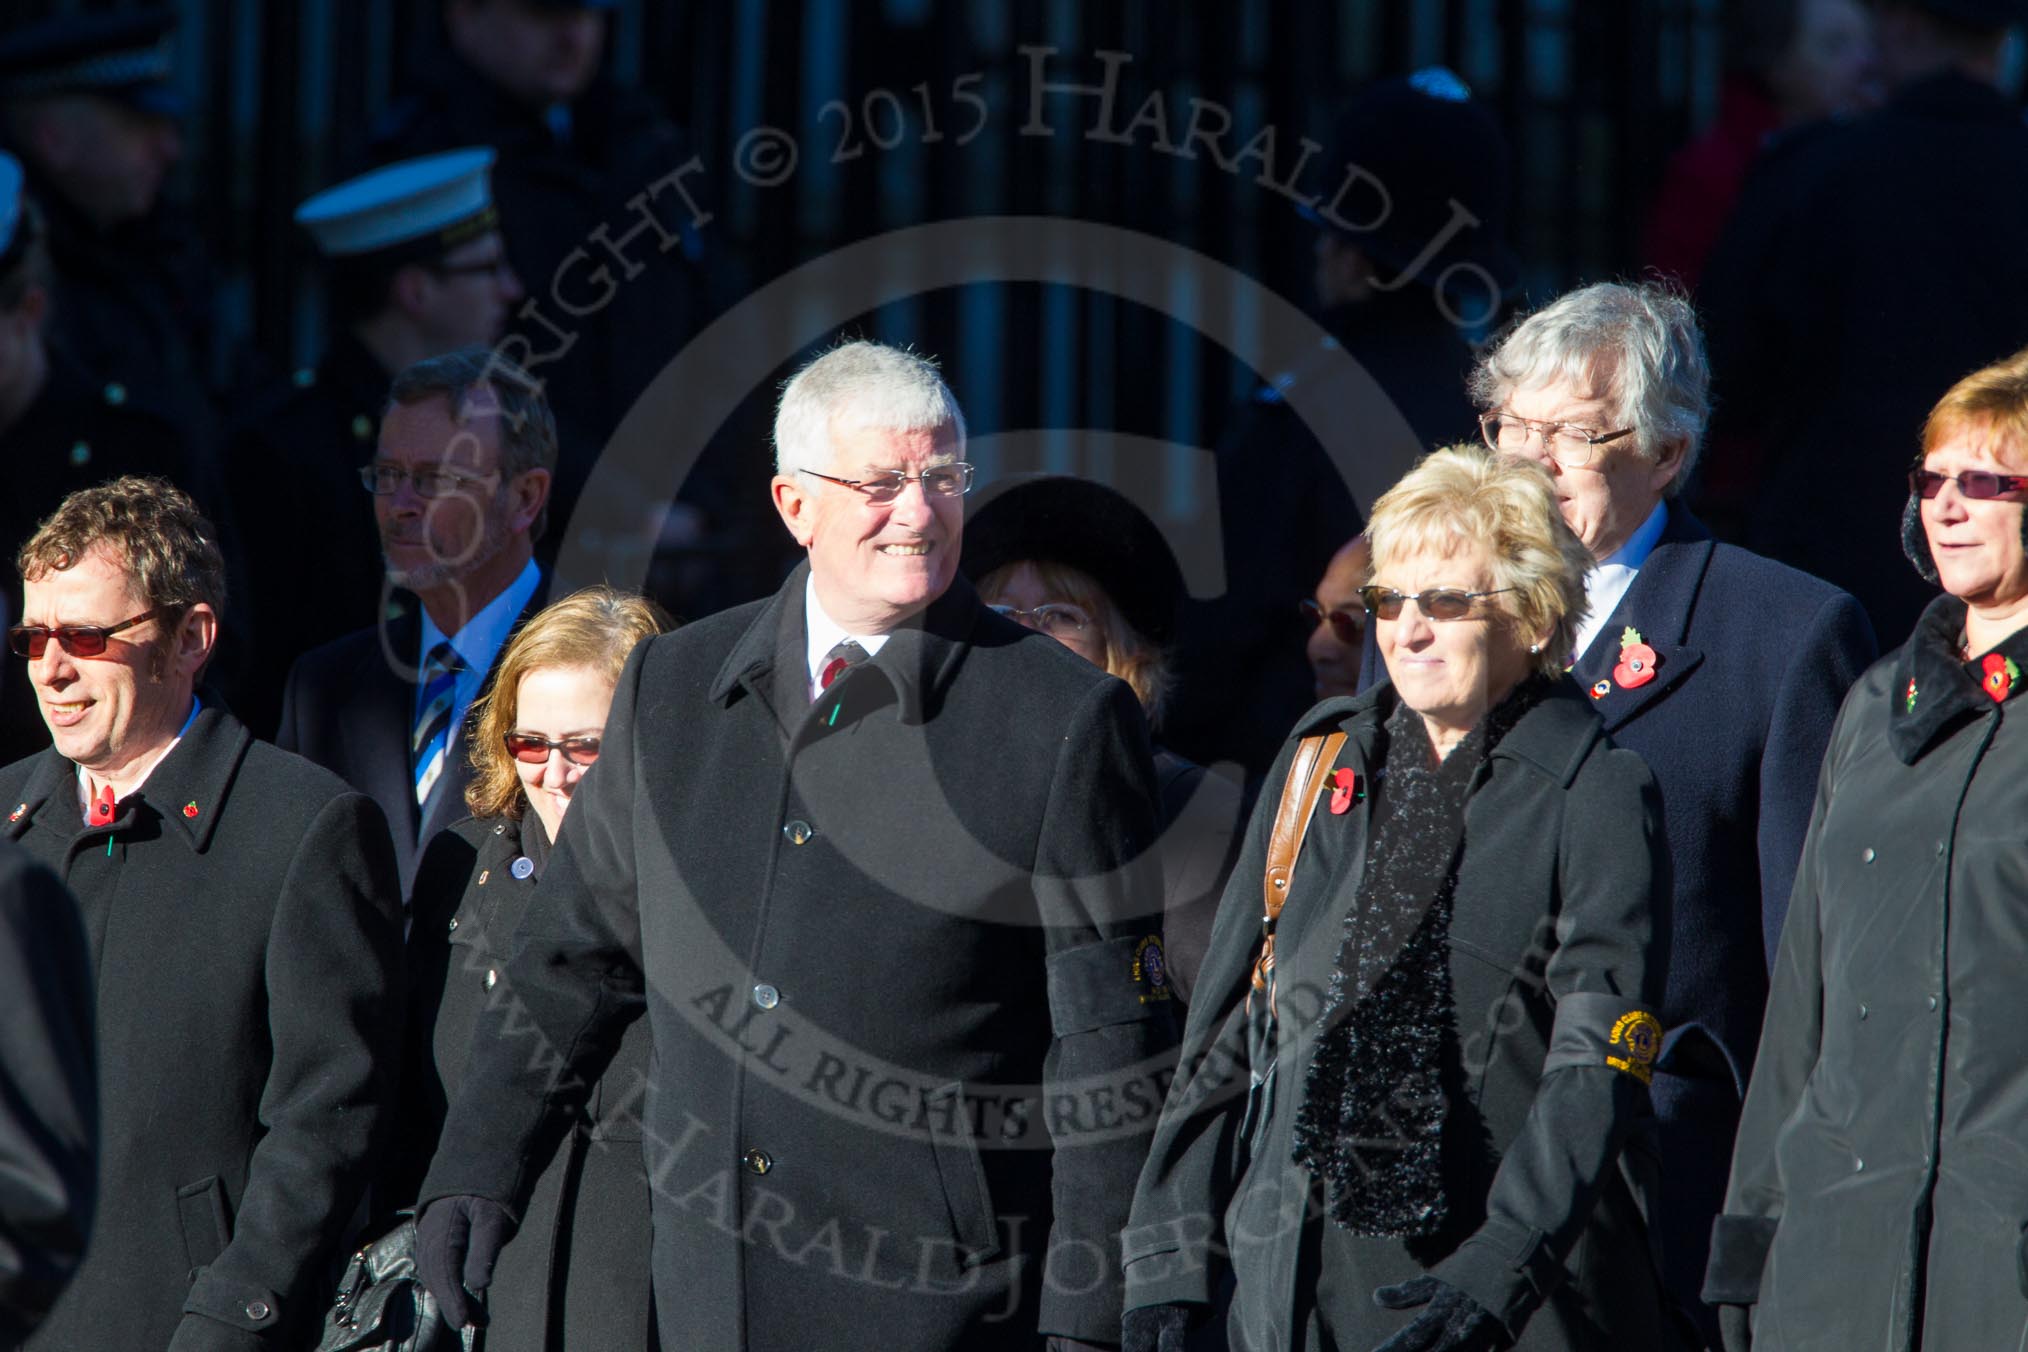 Remembrance Sunday Cenotaph March Past 2013: M40 - Lions Club International..
Press stand opposite the Foreign Office building, Whitehall, London SW1,
London,
Greater London,
United Kingdom,
on 10 November 2013 at 12:14, image #2181